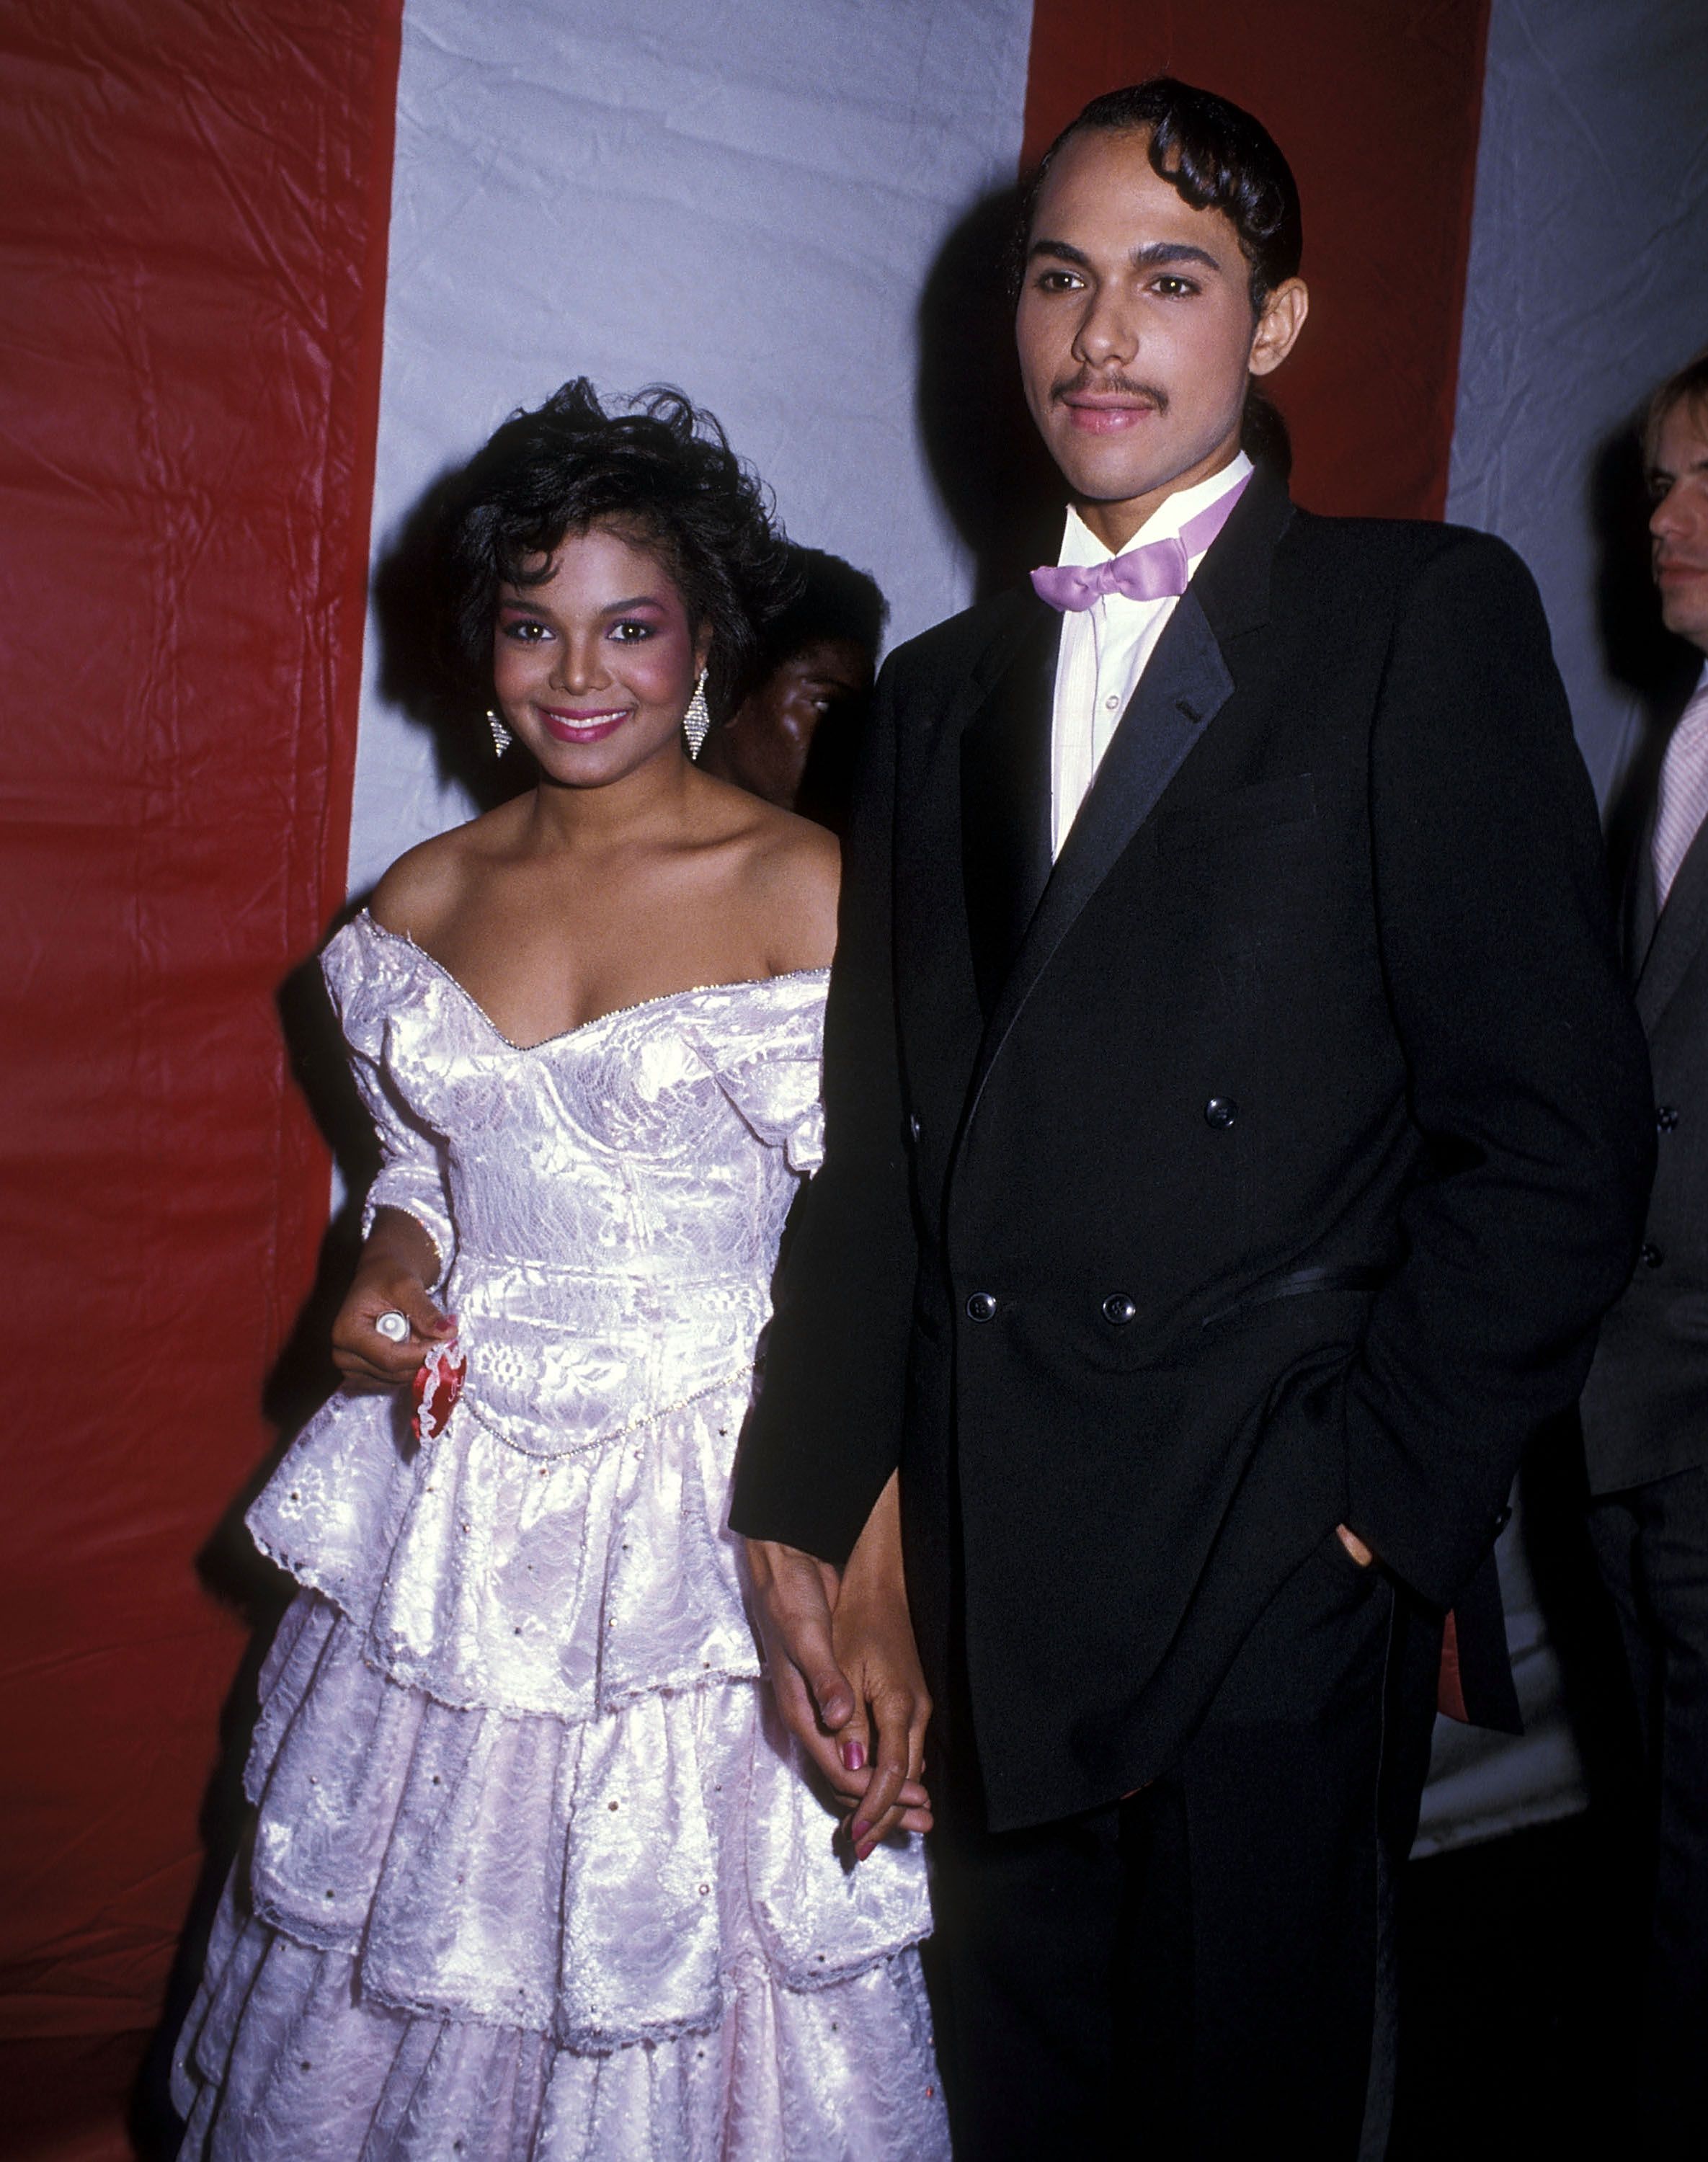 Janet Jackson and James DeBarge at the 12th Annual American Music Awards in 1985 | Source: Getty Images